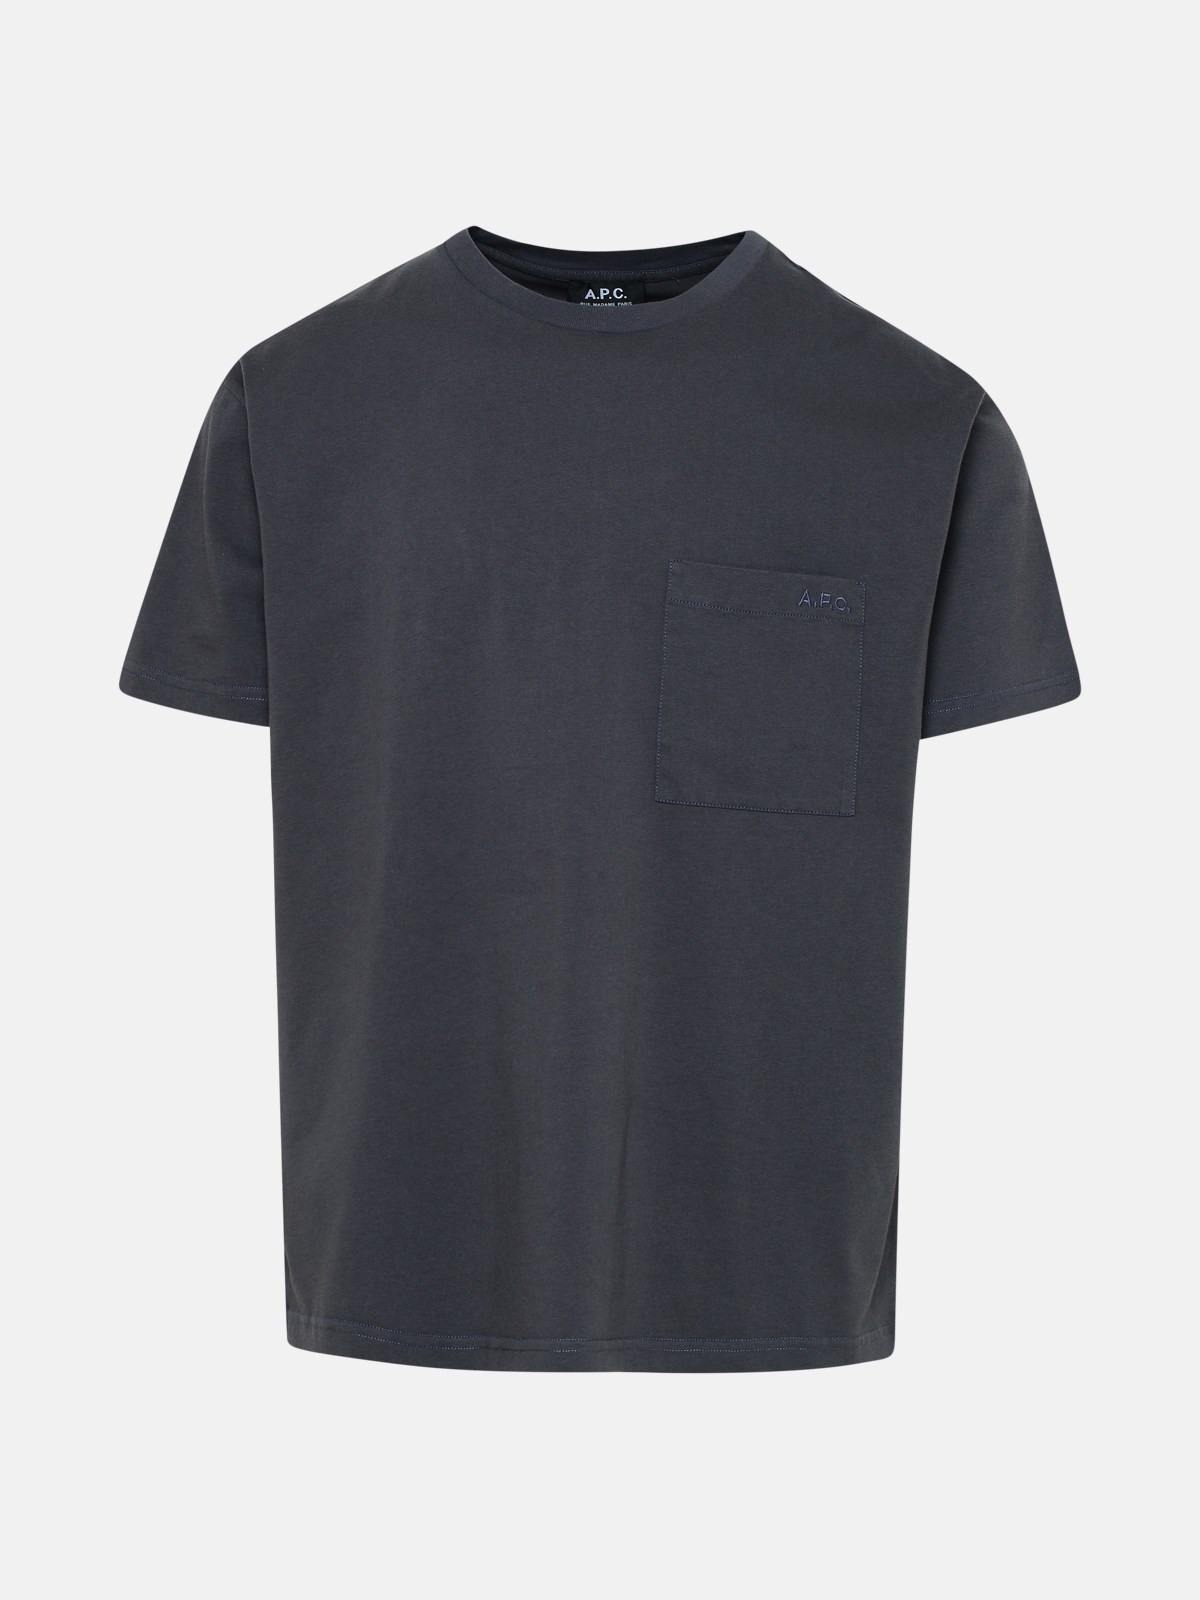 A.p.c. Kids' Viscose Gray Cotton T-shirt In Grey